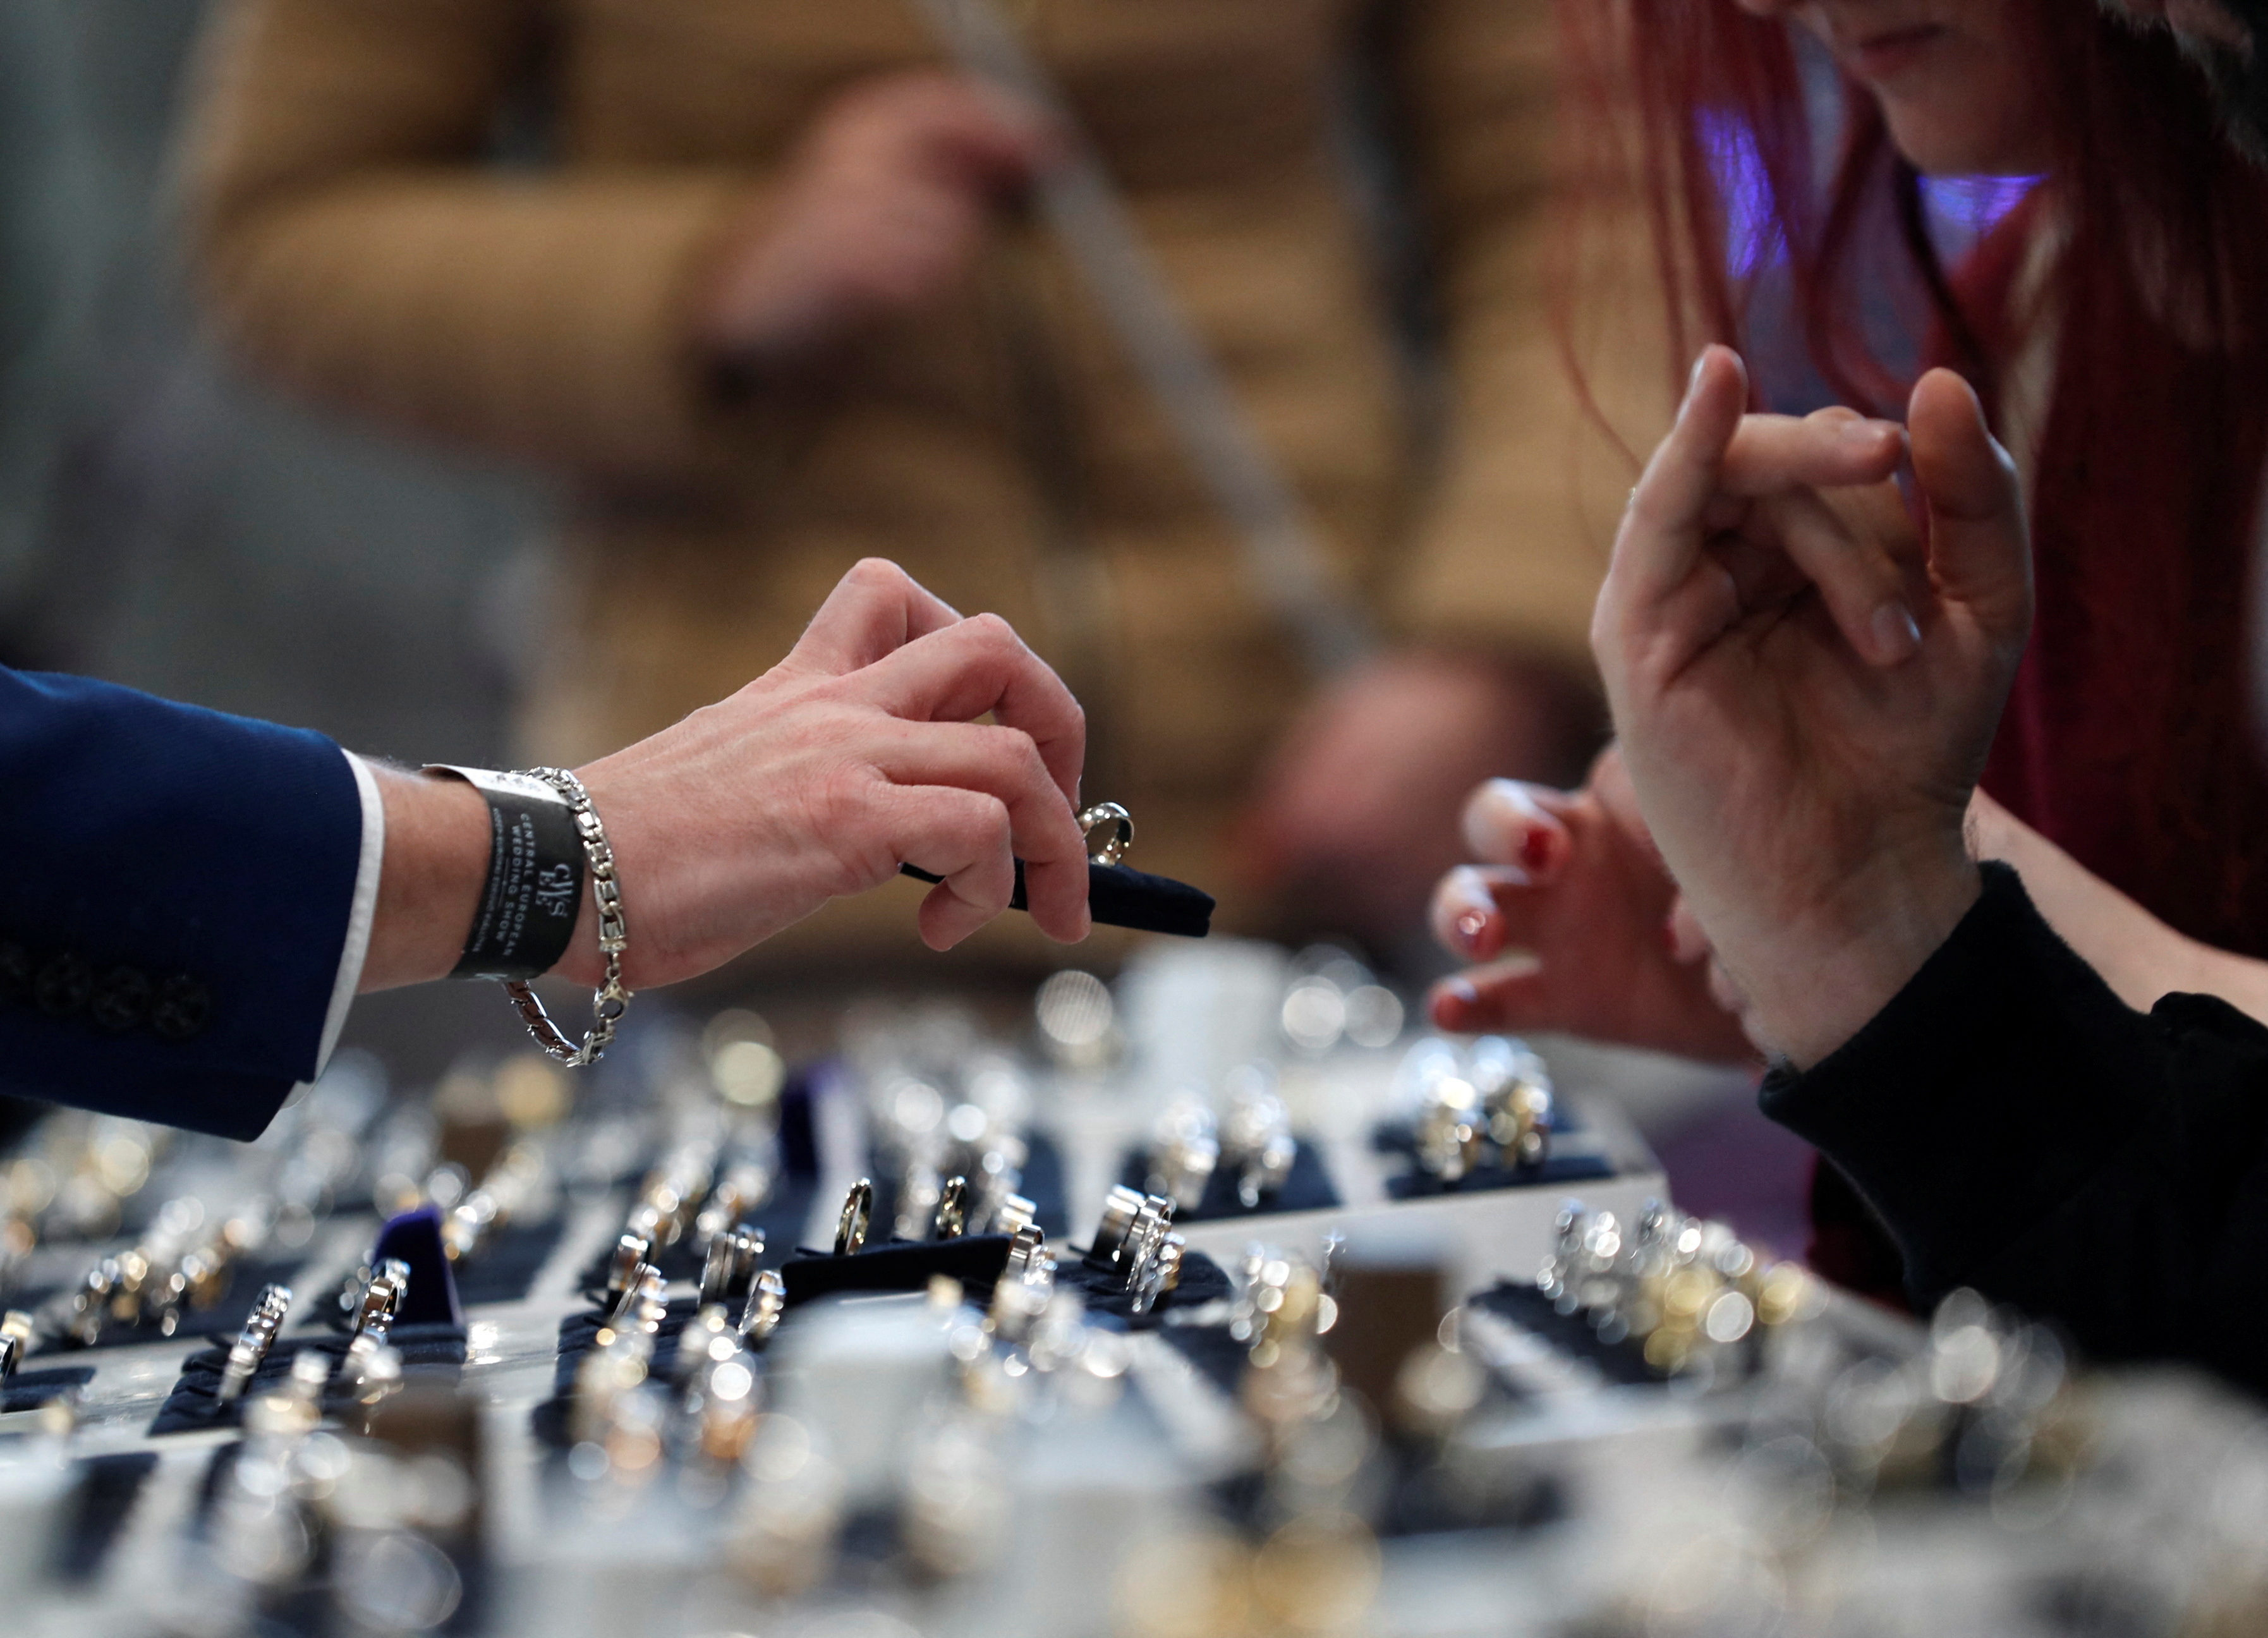 A vendor shows a wedding ring during the Central European Wedding Show in Budapest